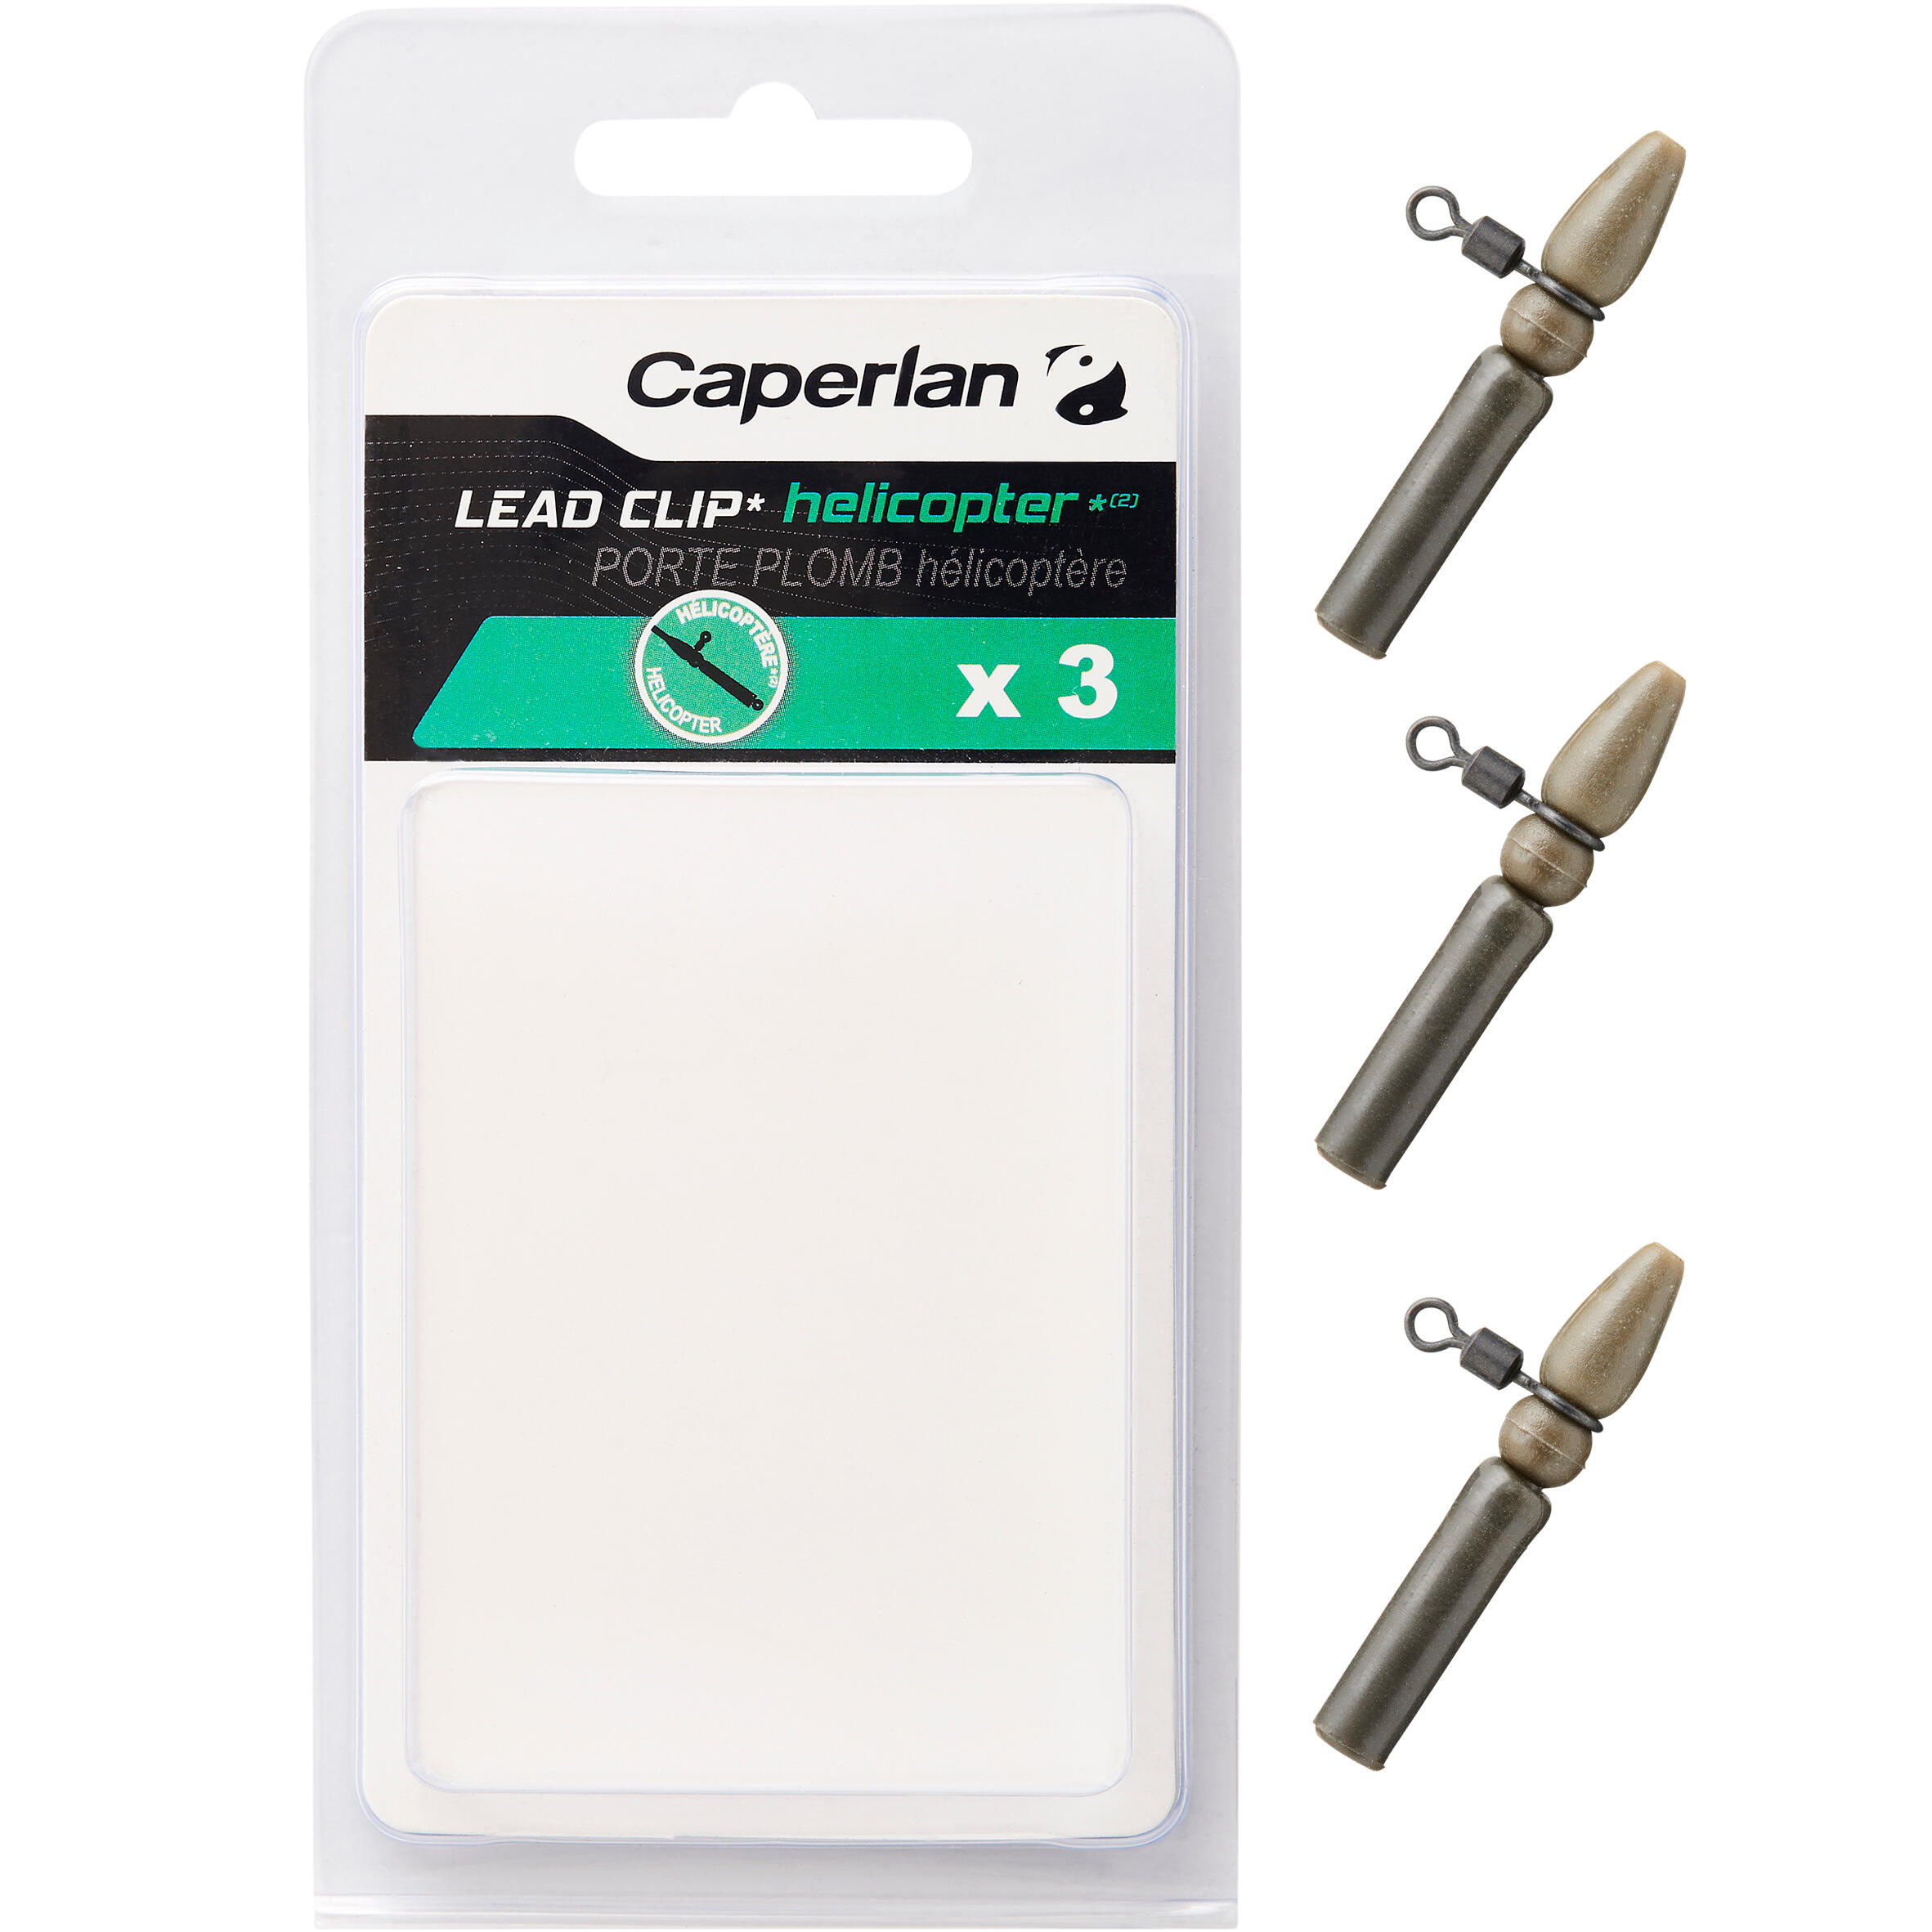 CAPERLAN LEAD CLIP HELICOPTER CARP FISHING ACCESSORY